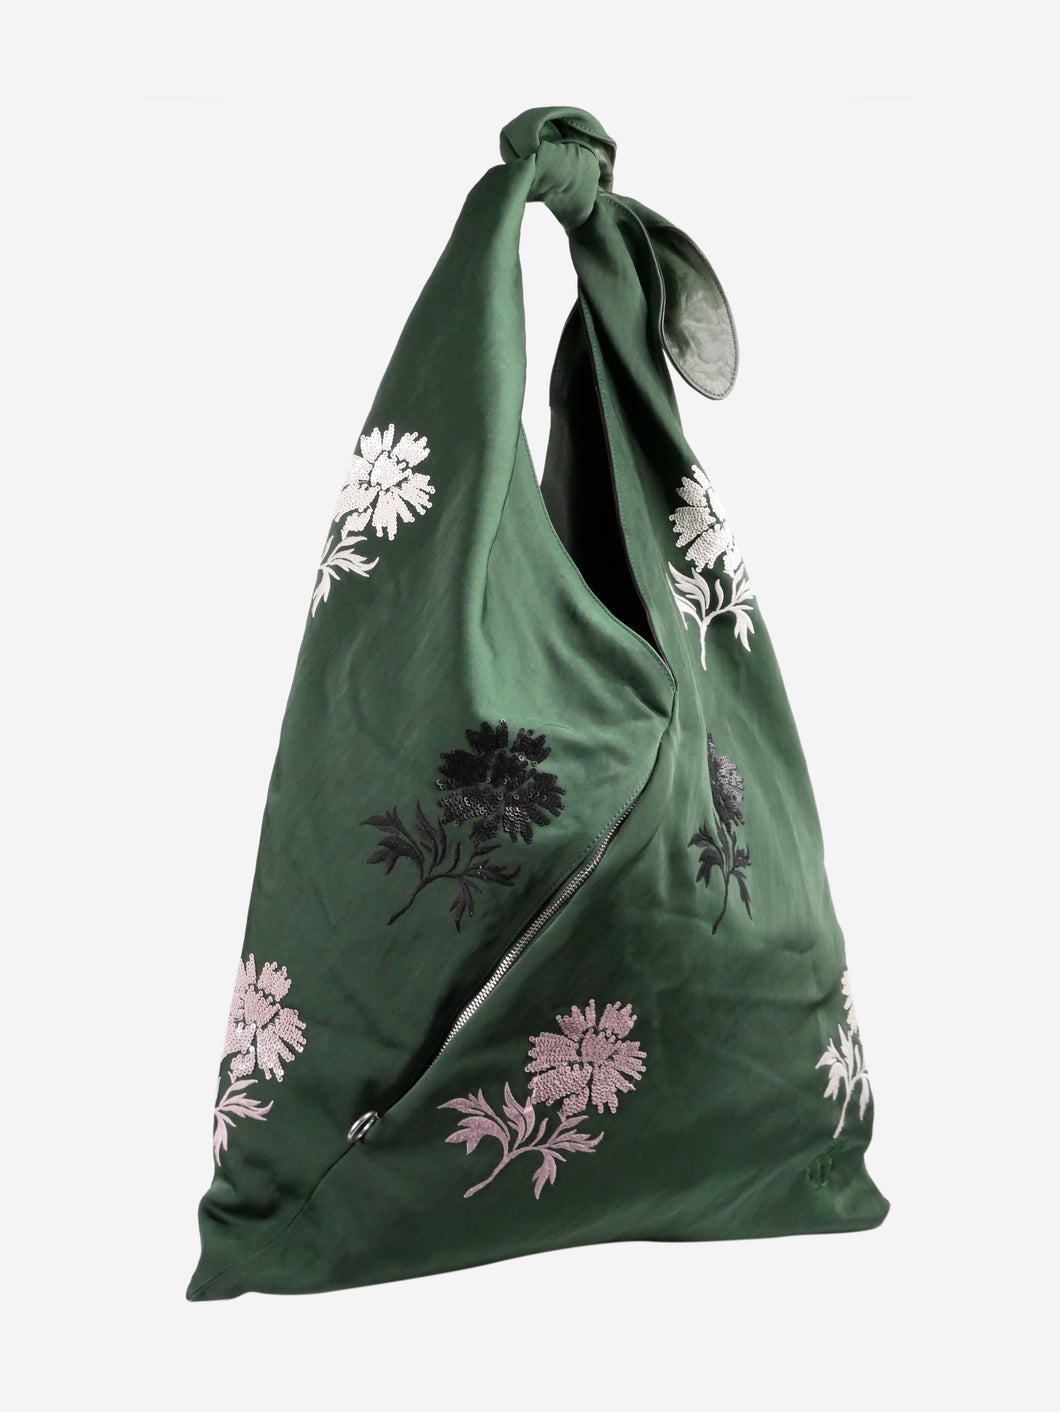 Green floral sequin and embroidered shoulder bag with knot handle